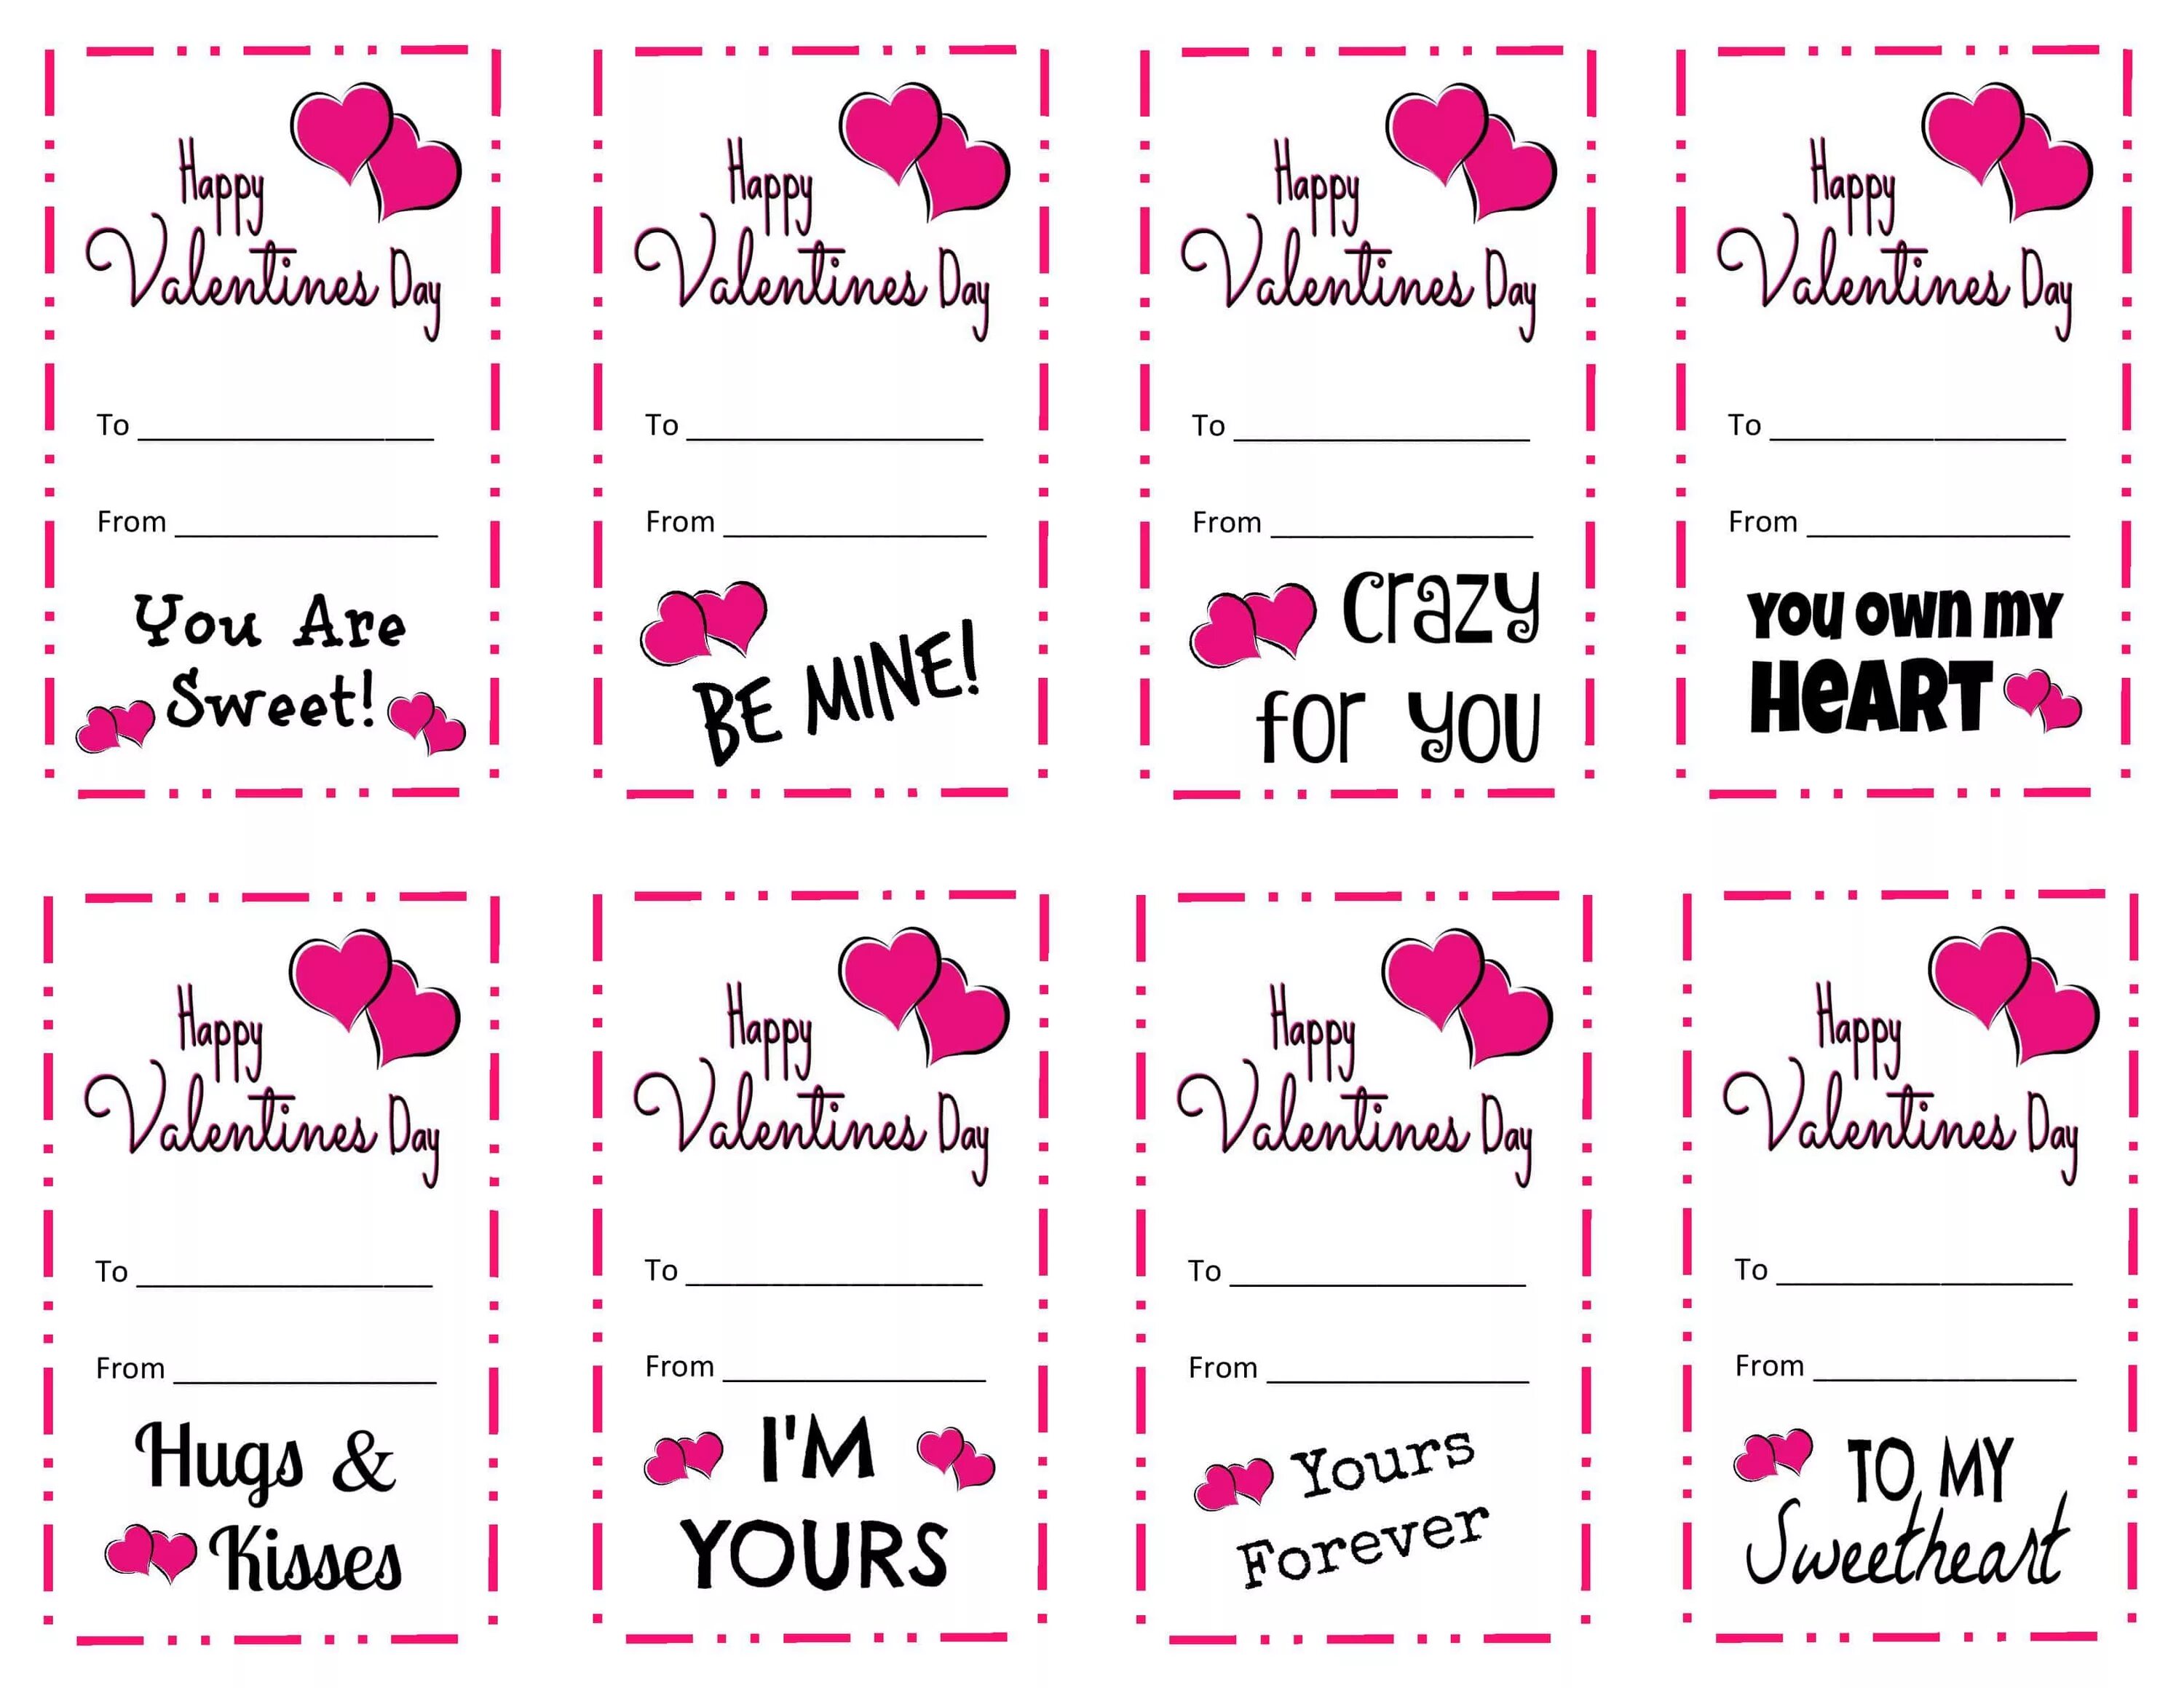 Printable cards. Valentines Cards Printable. Valentine Cards to Print. Valentines Printable. Valentine's Day Printable.